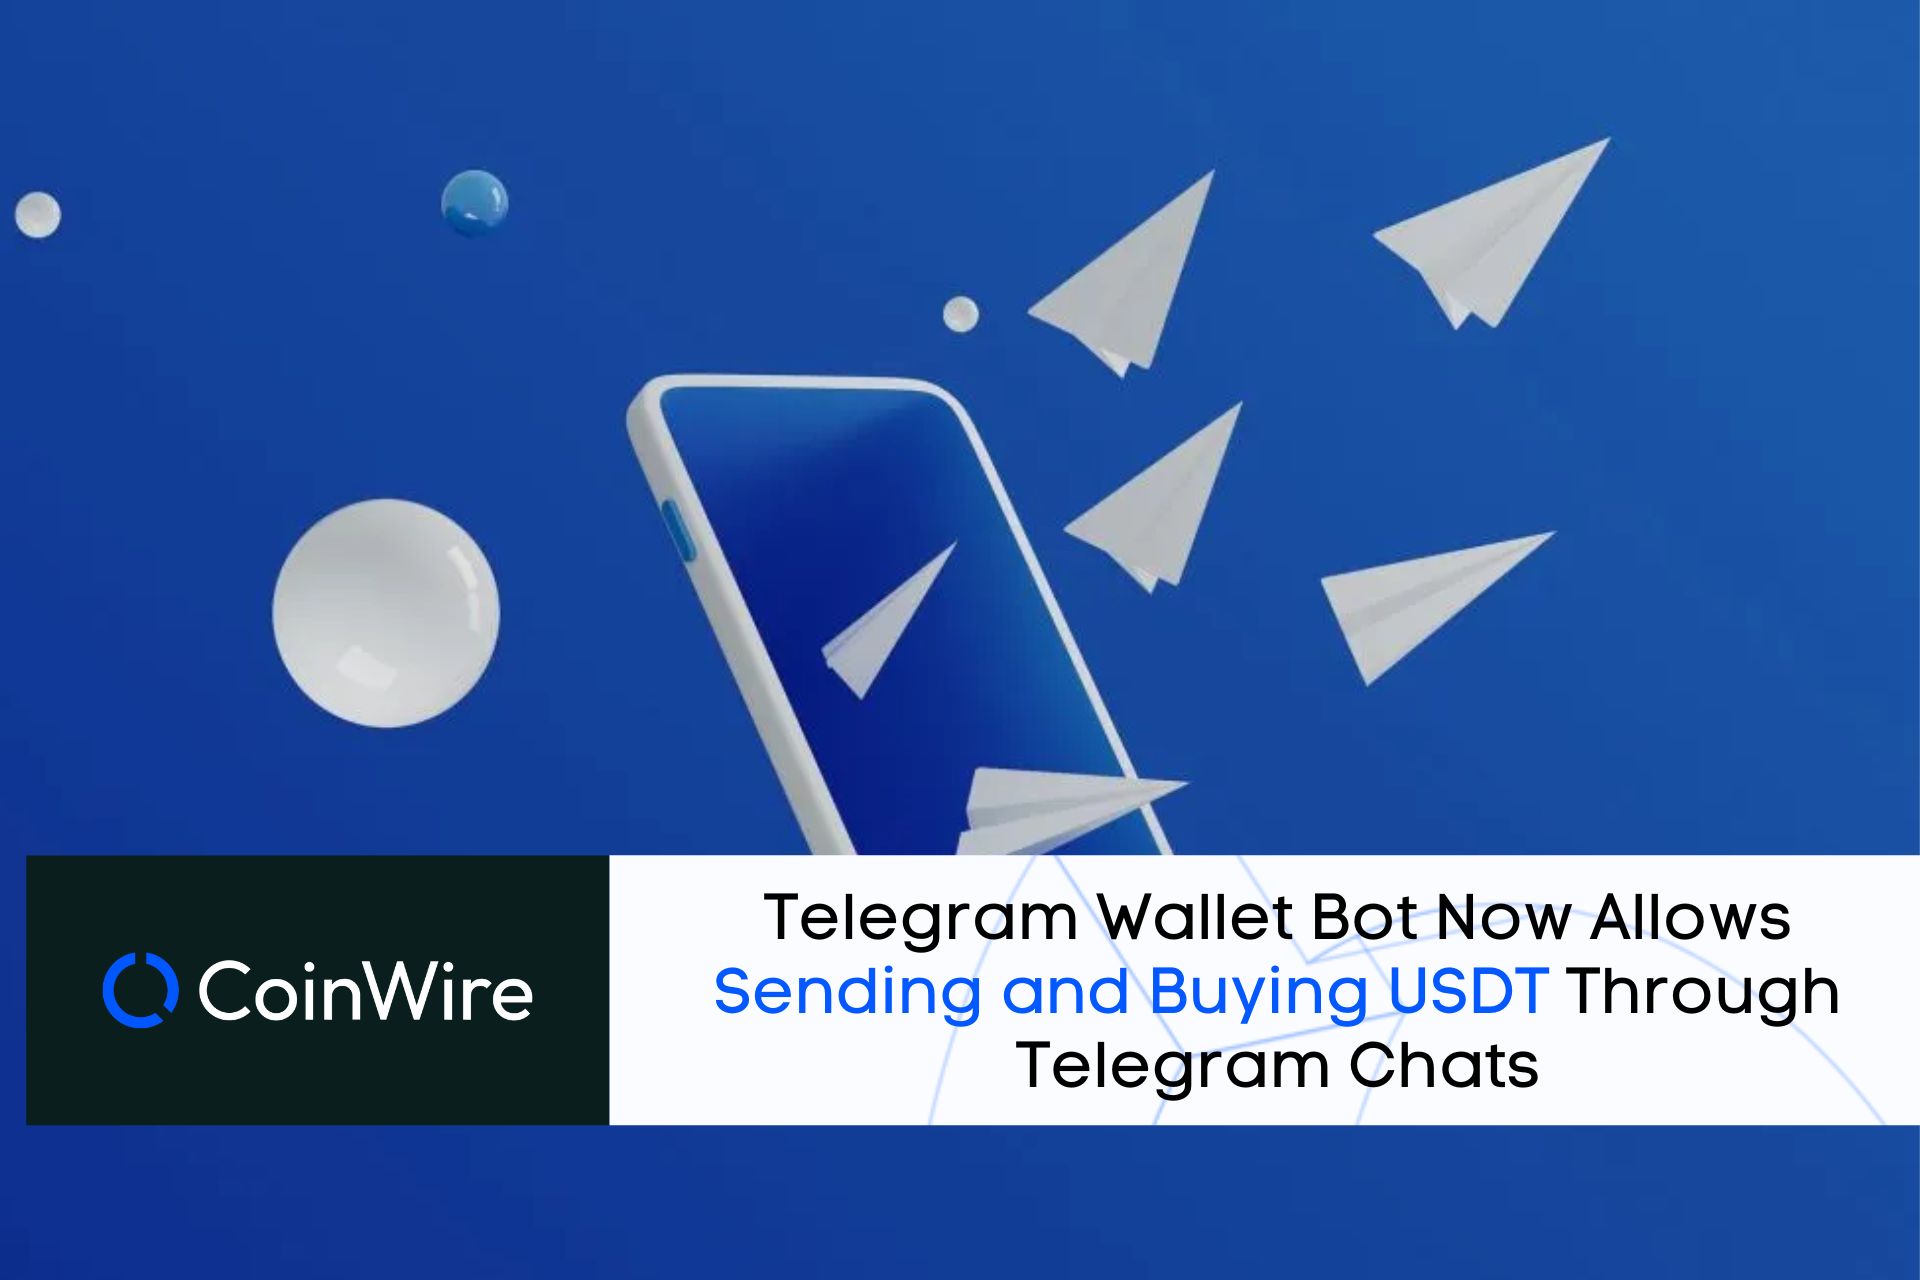 Sending And Buying Usdt Is Now Allowed Through Telegram Wallet Bot